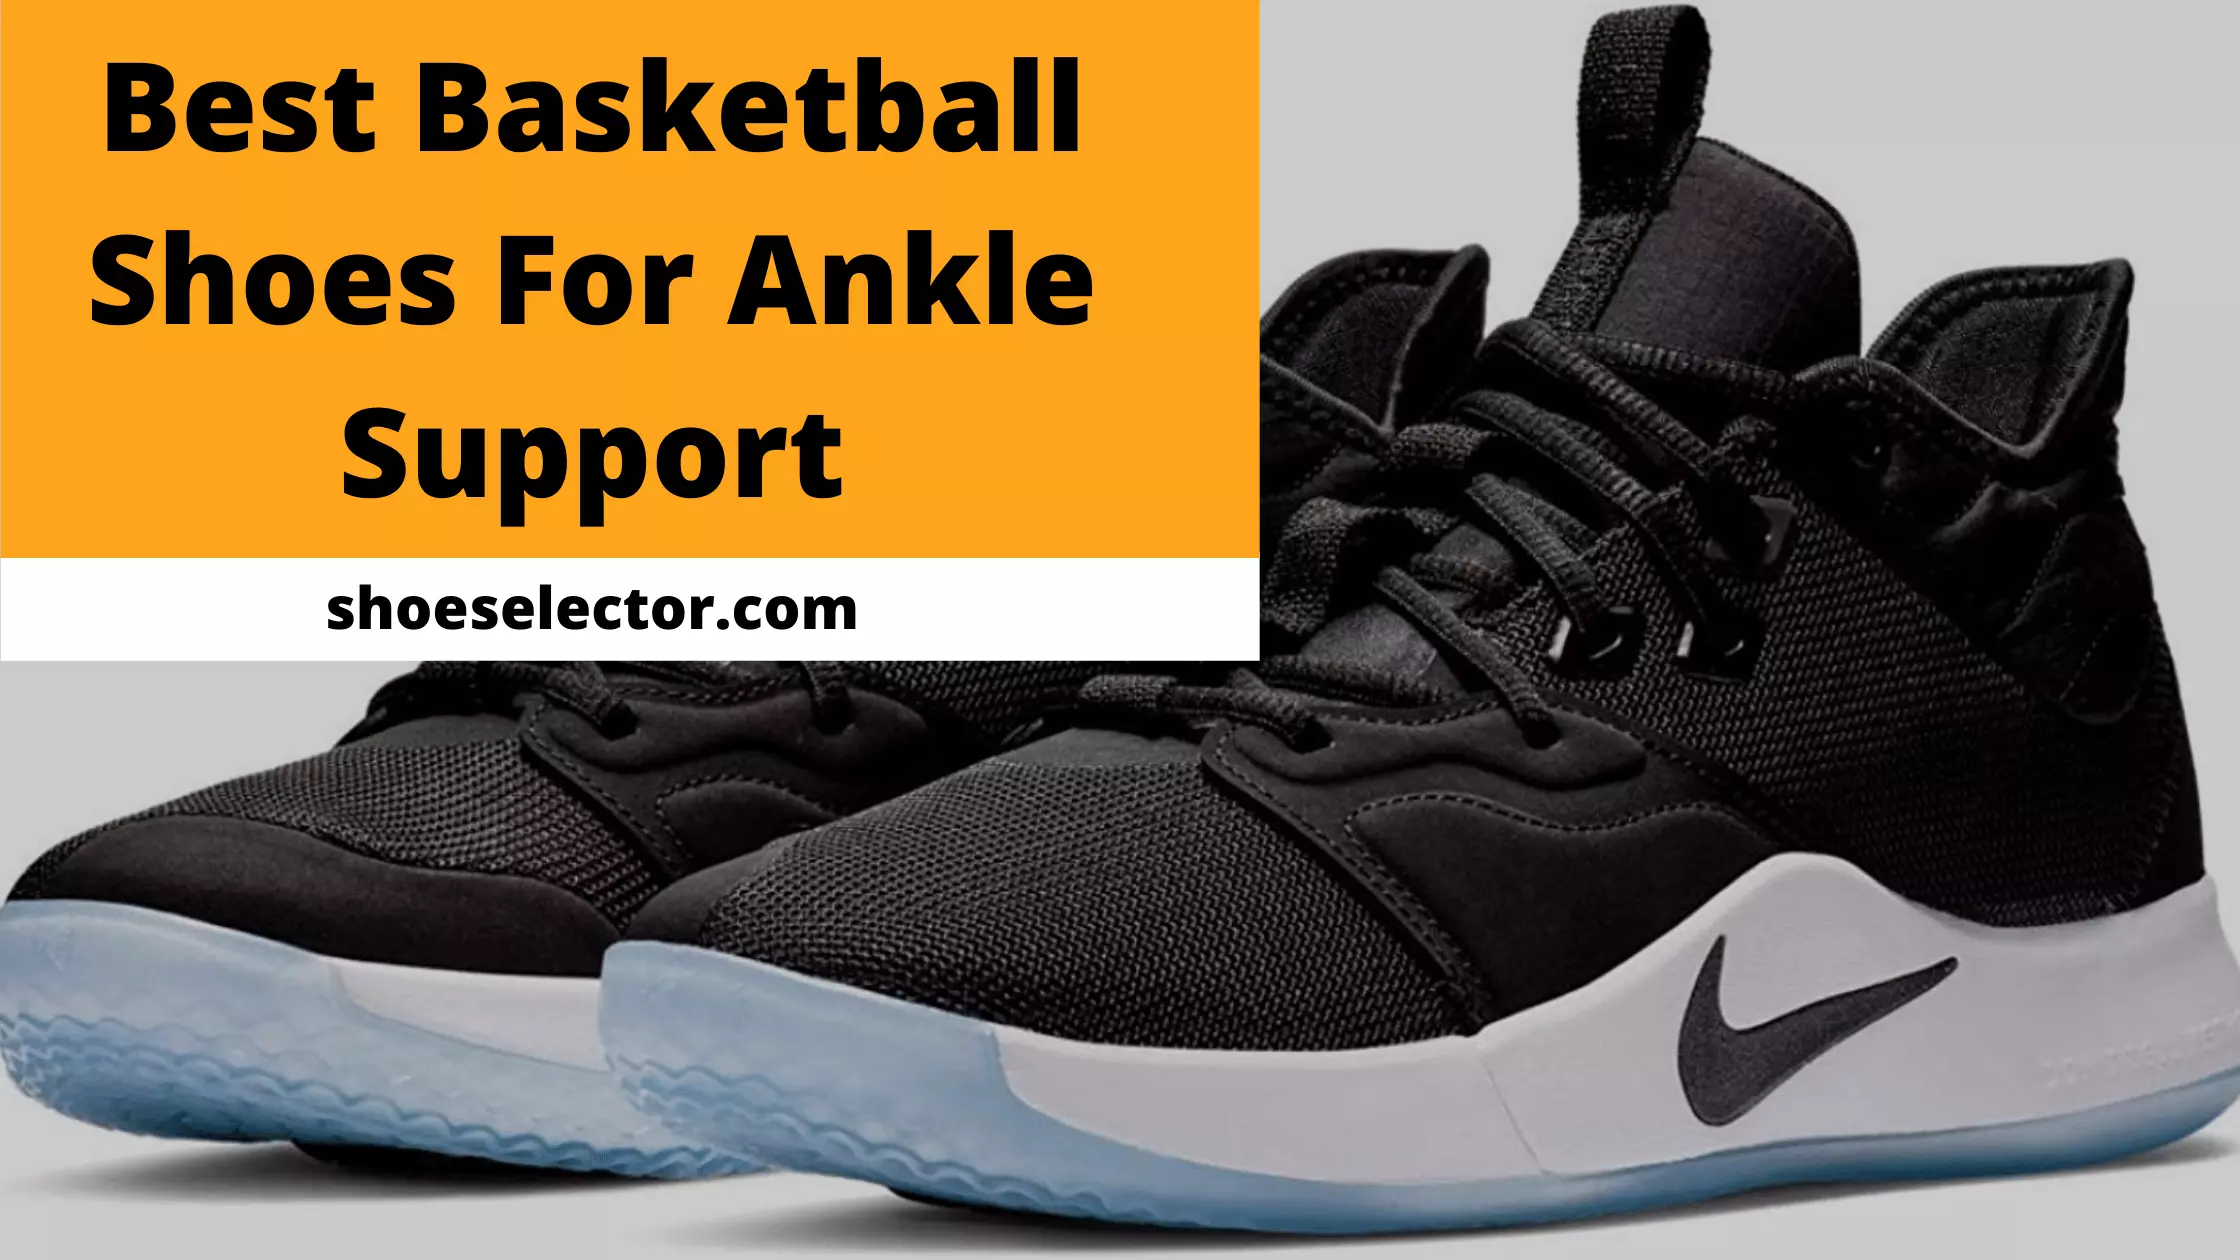 Best Basketball Shoes For Ankle Support - Most Supportive Shoes